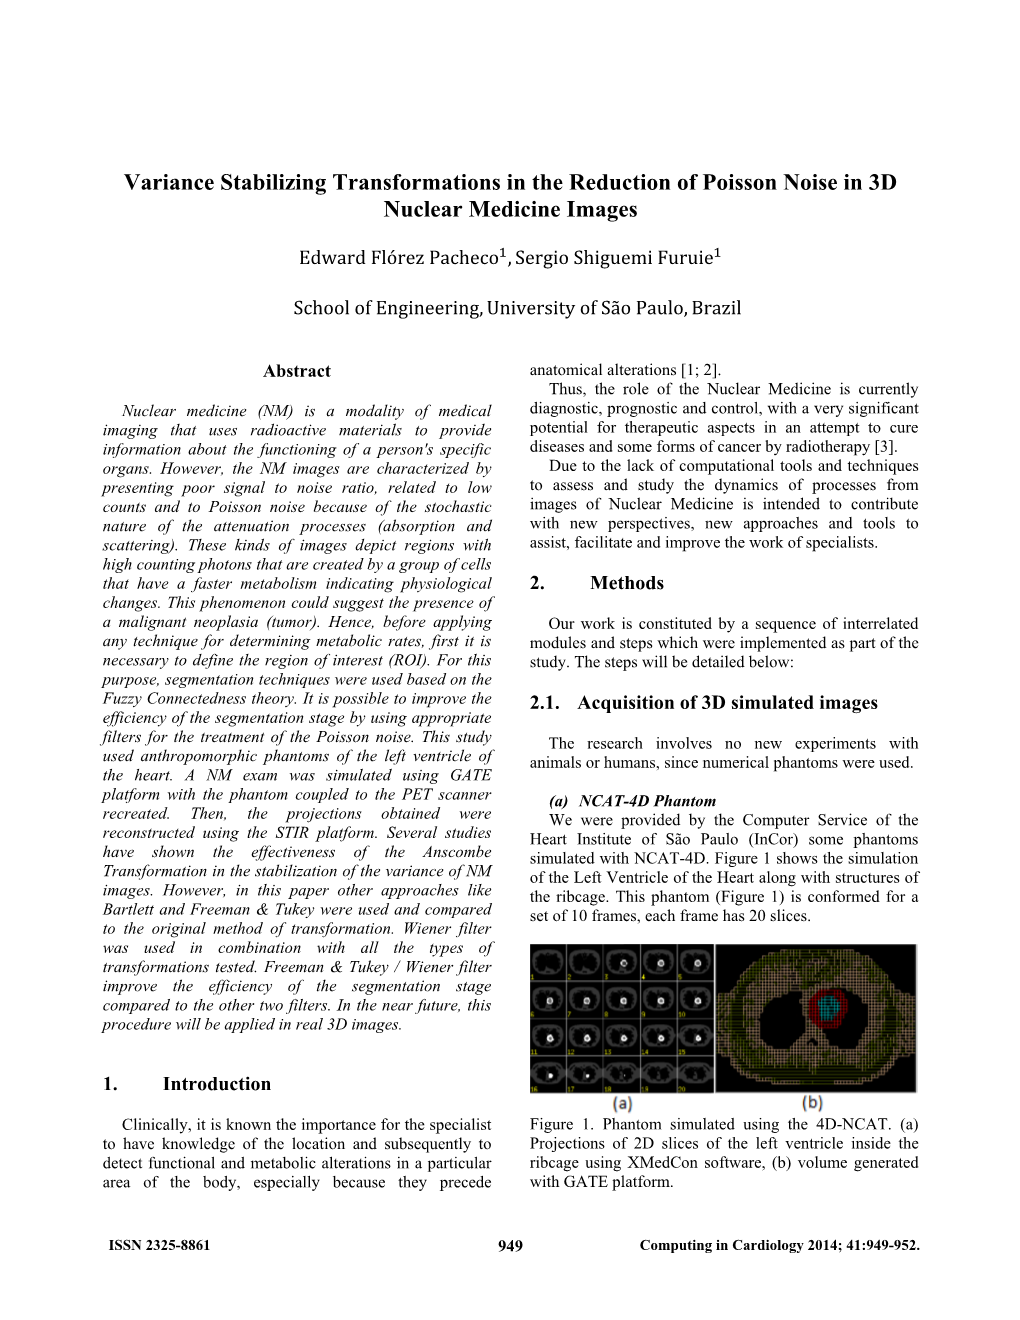 Variance Stabilizing Transformations in the Reduction of Poisson Noise in 3D Nuclear Medicine Images